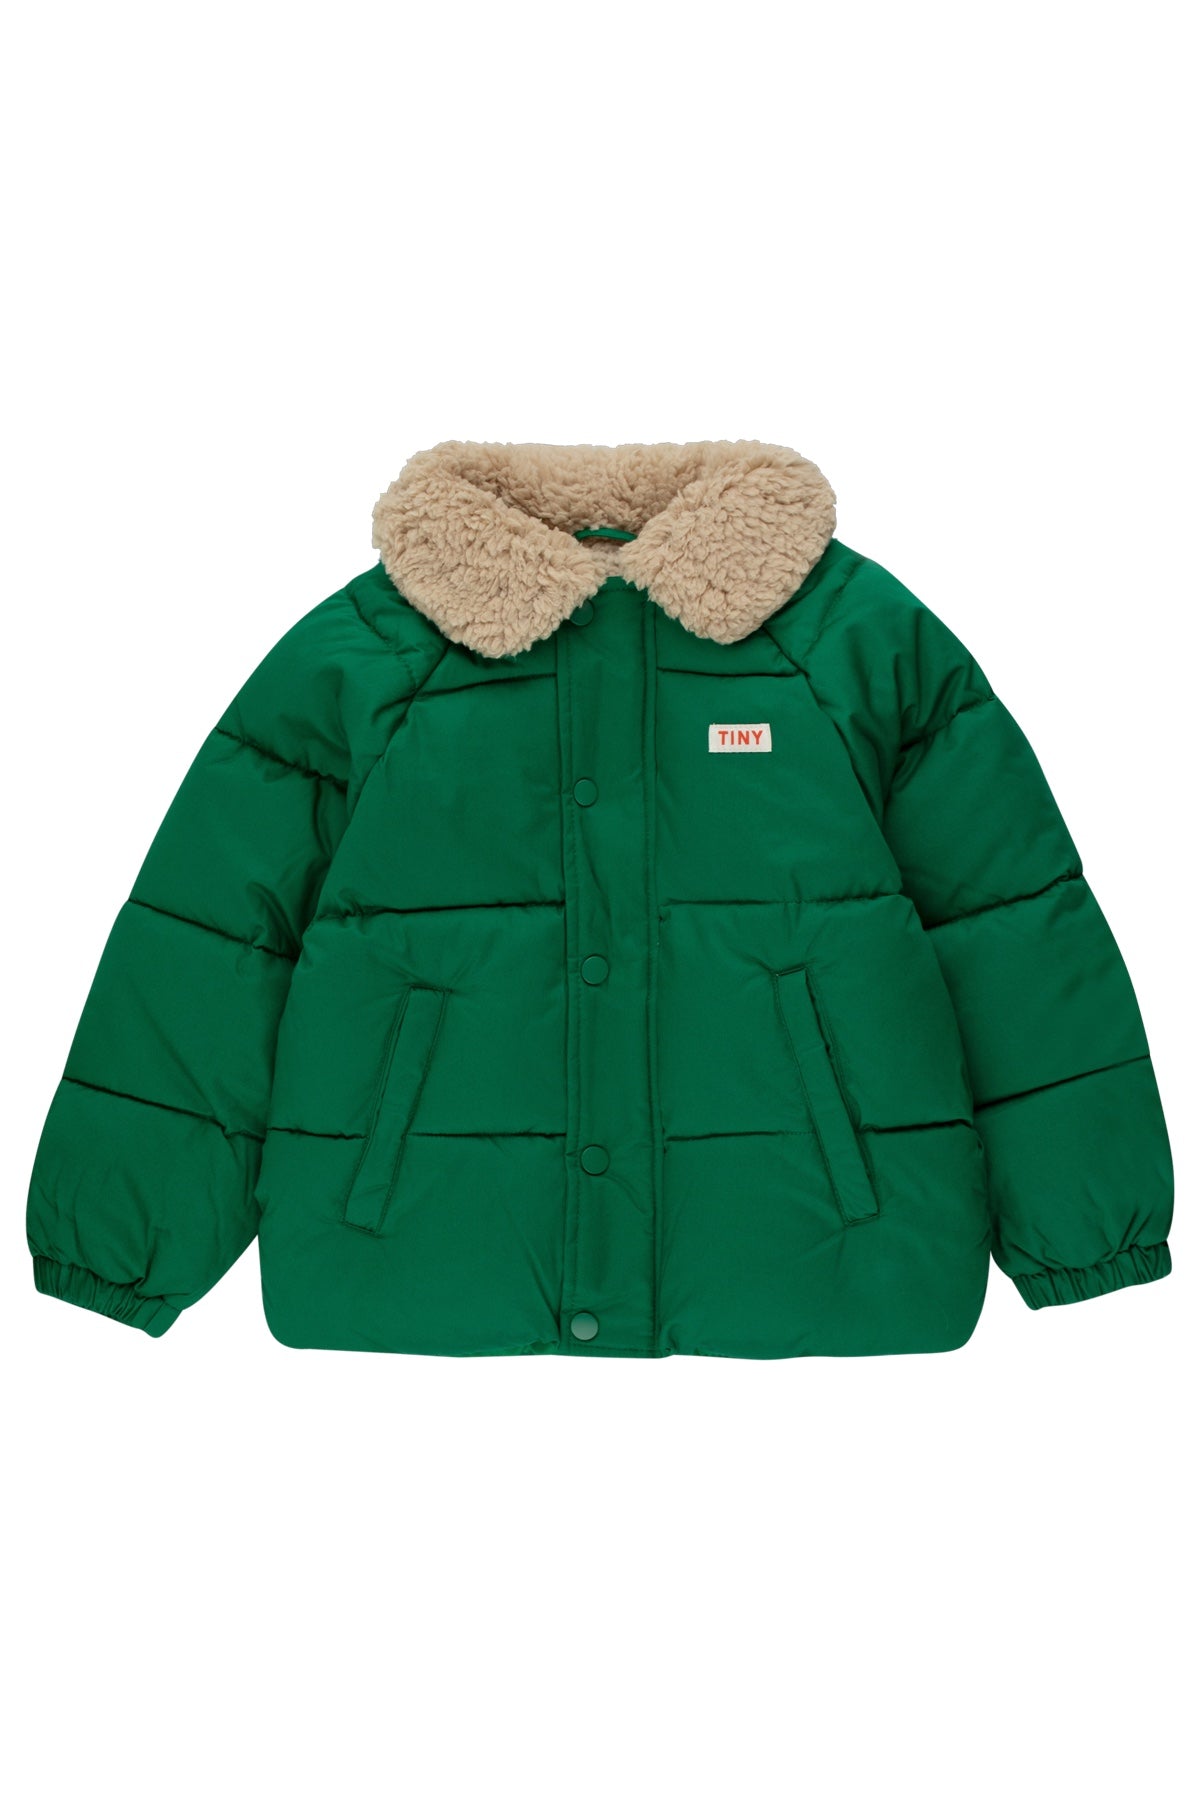 Tiny Cottons Solid Padded Jacket - Grass Green